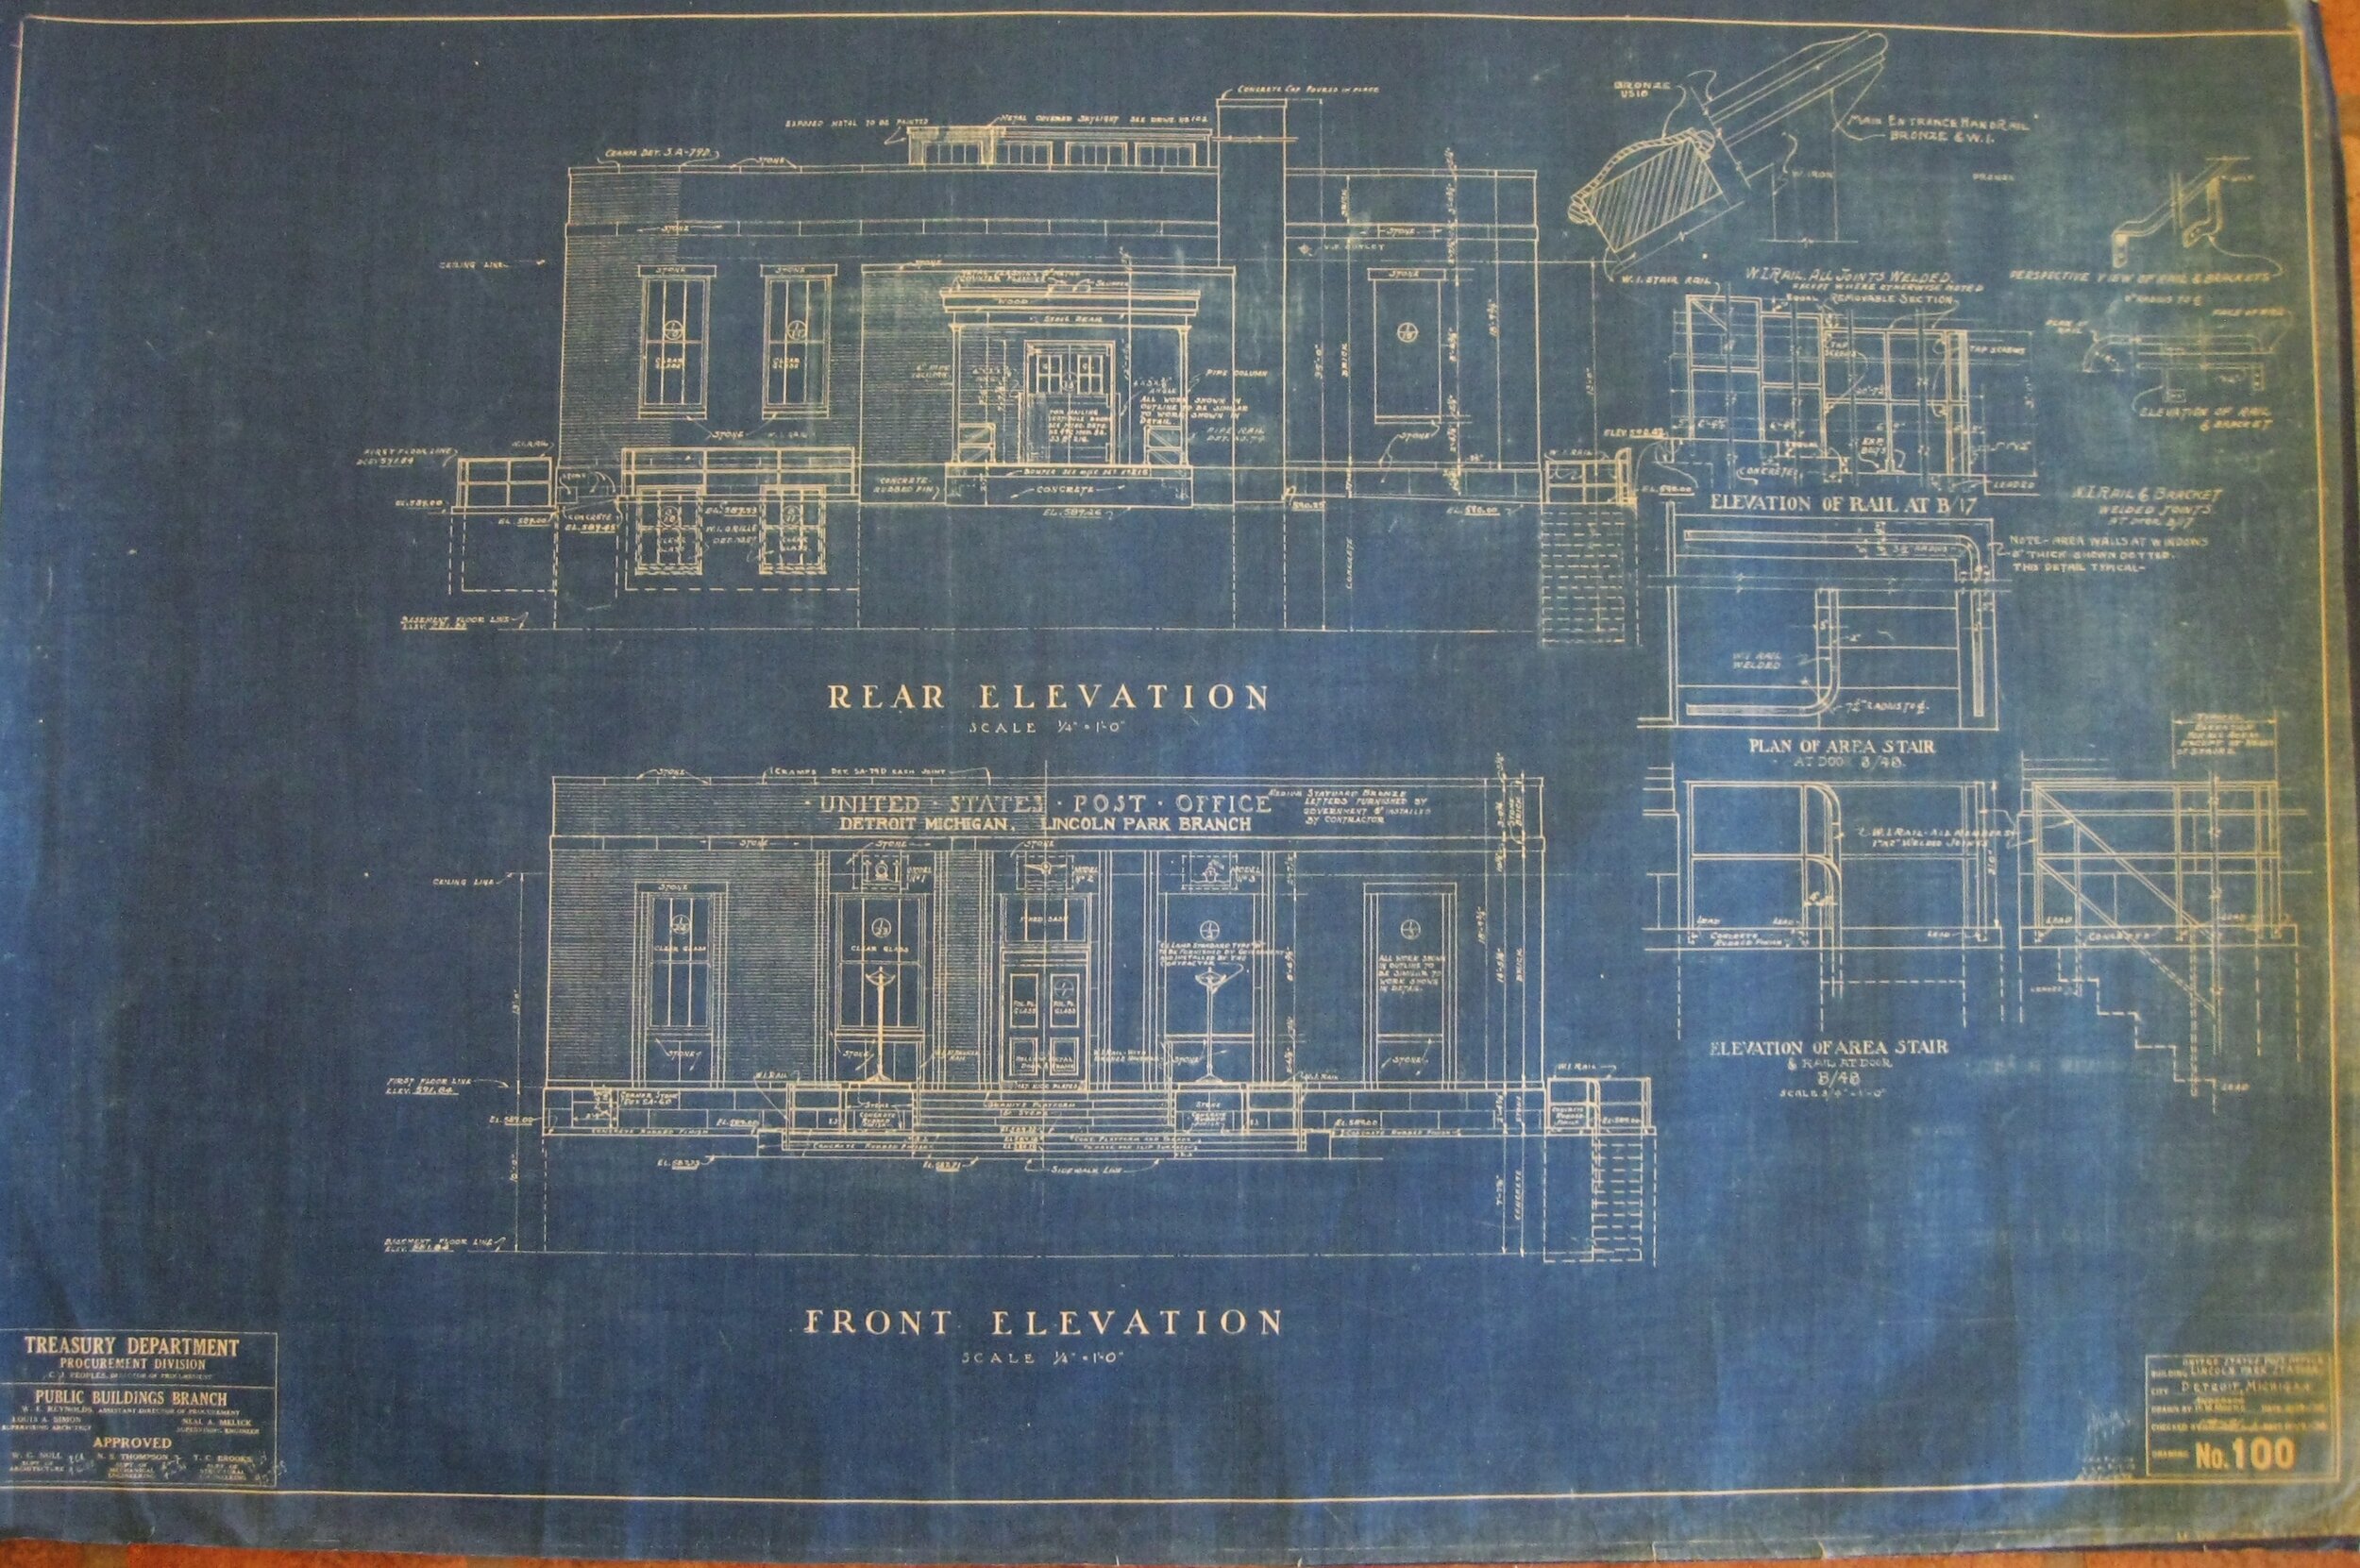 Blueprint No. 100 showing rear and front elevations; one of dozens of blueprints for the Lincoln Park post office building; shown on exhibit